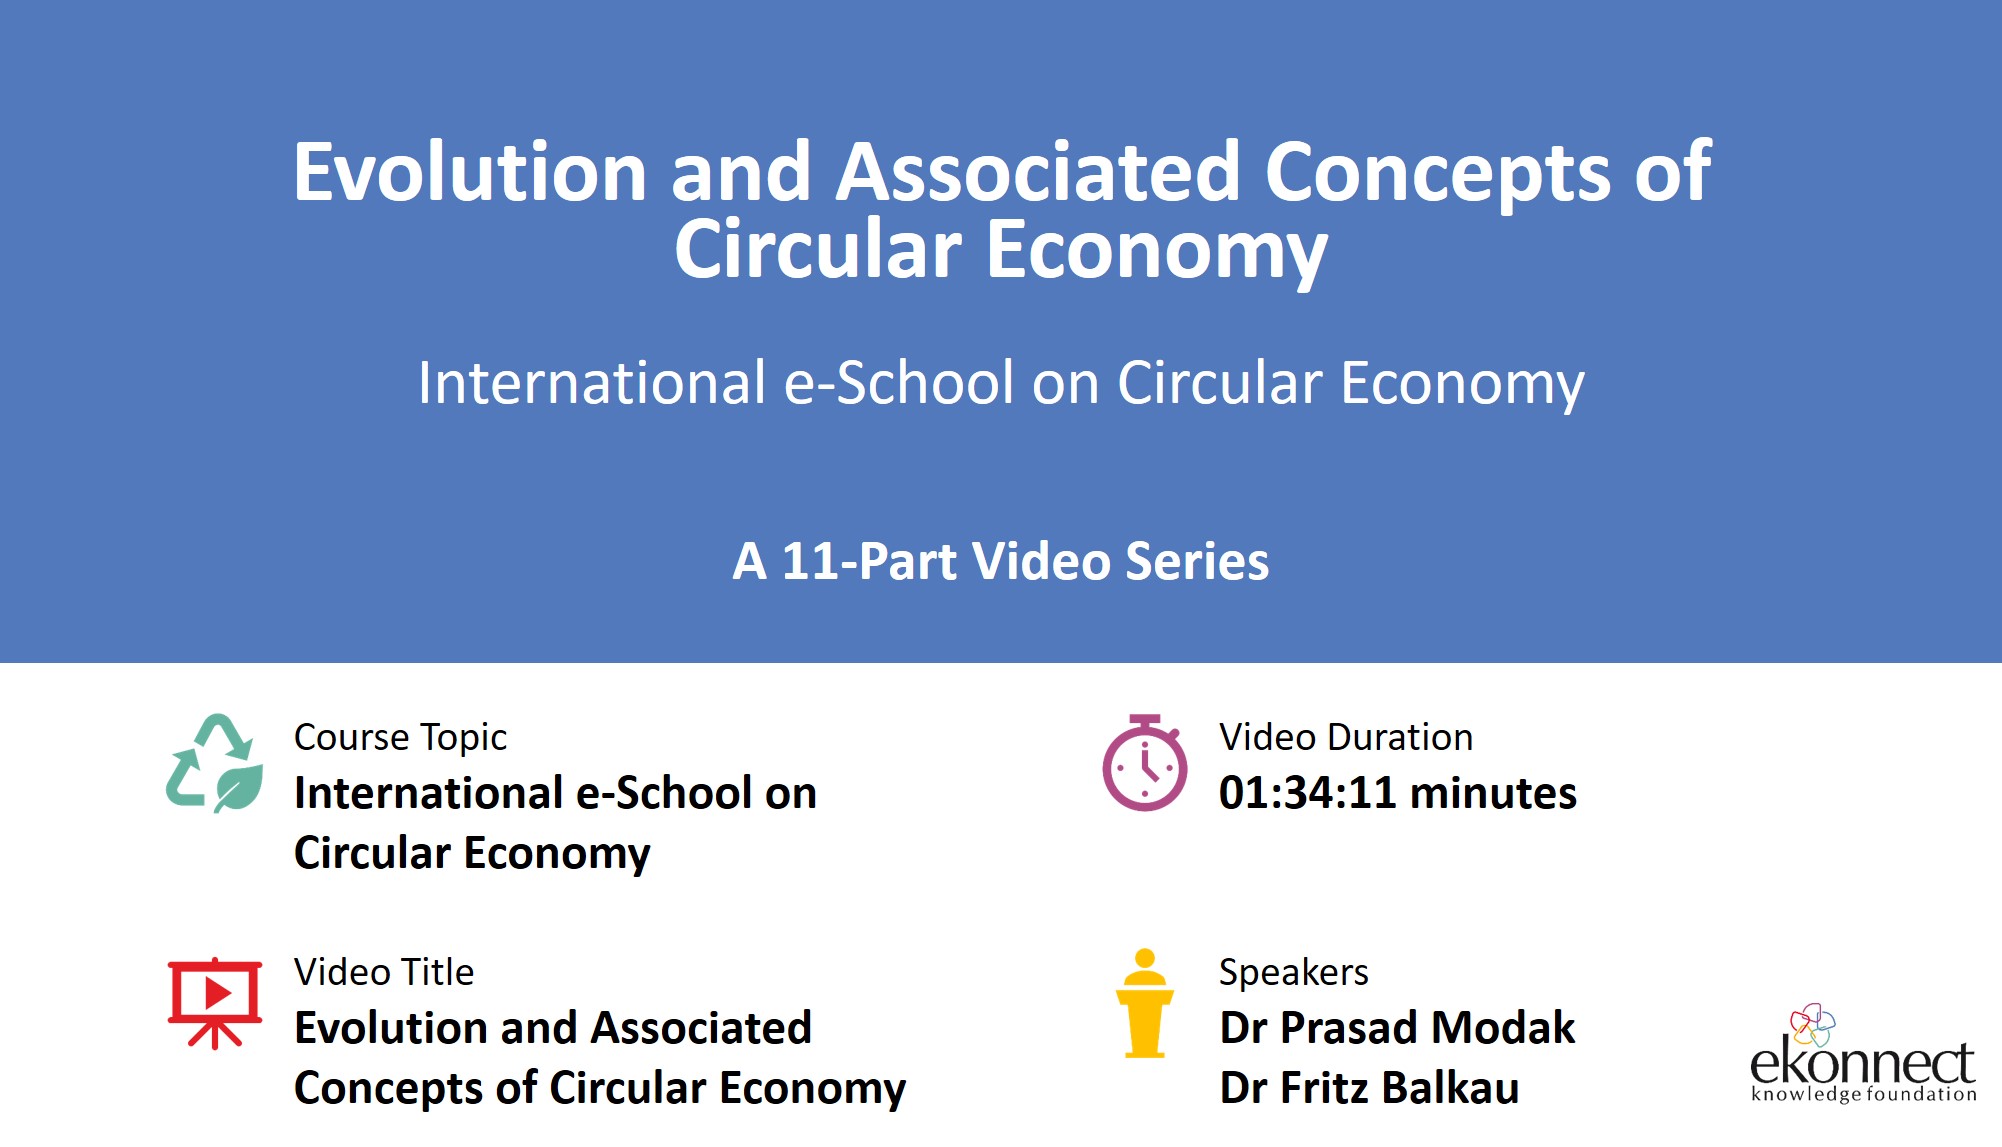 Evolution and Associated Concepts of Circular Economy